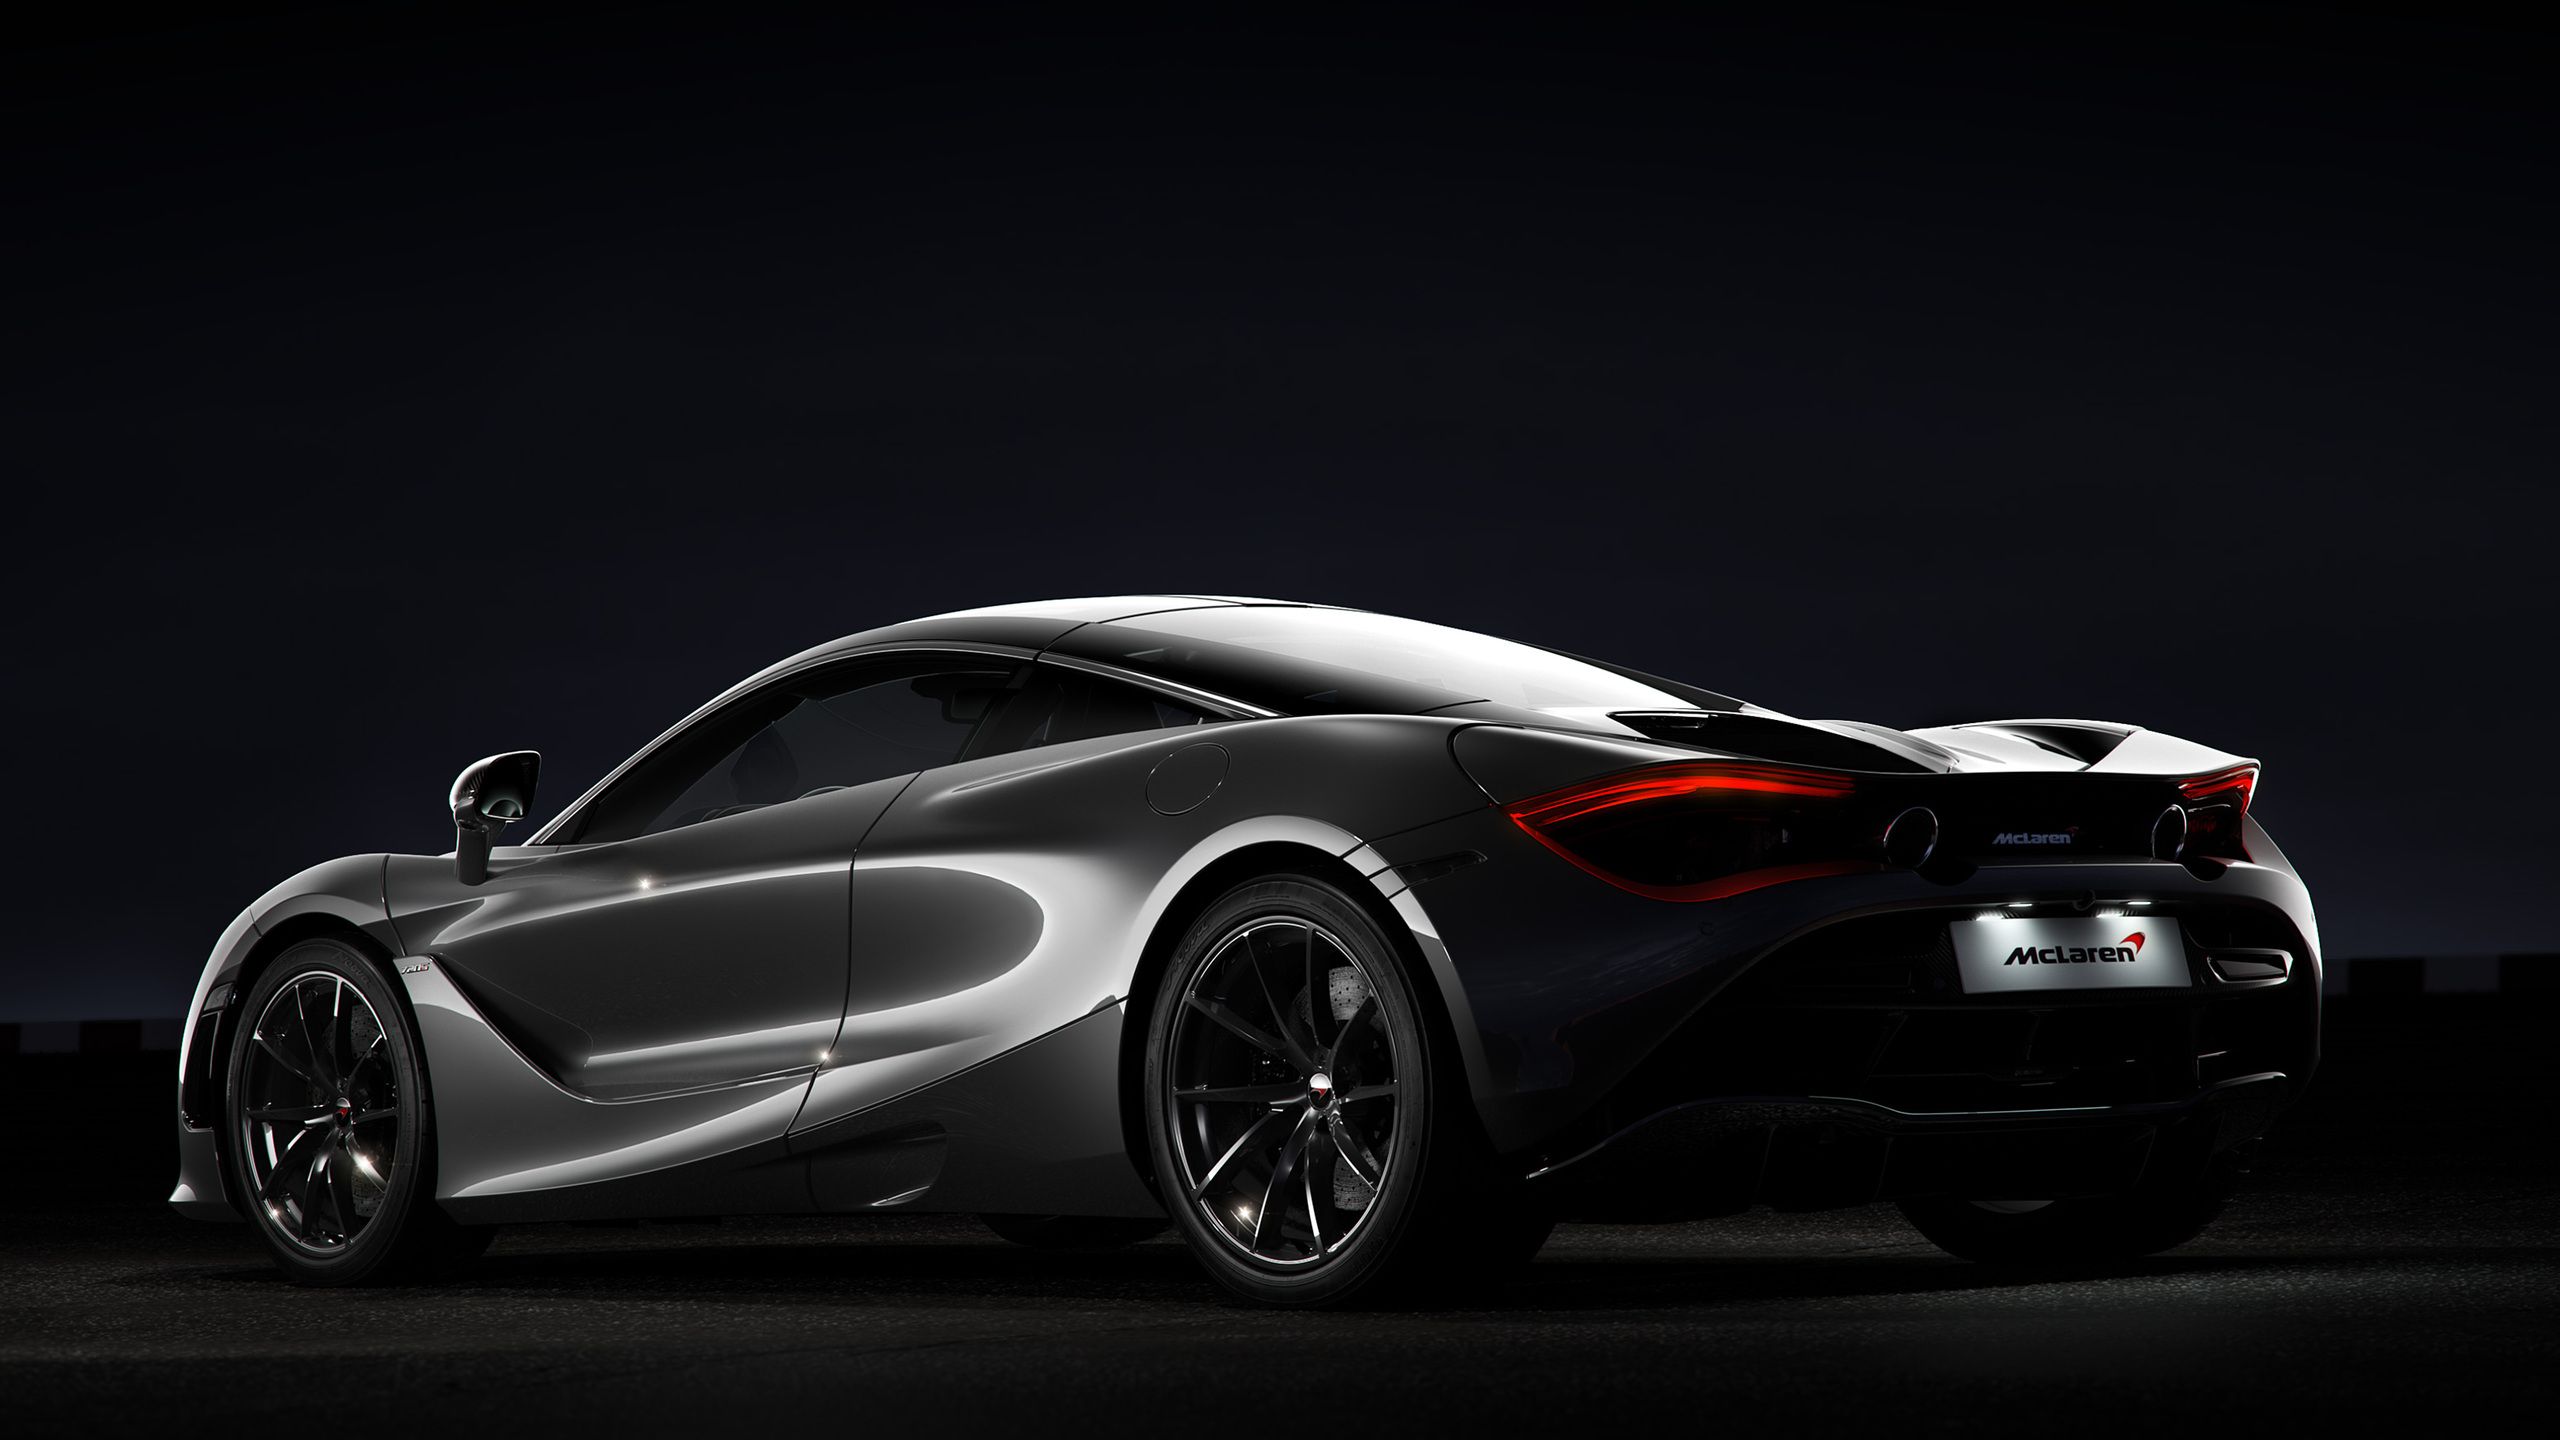 McLaren 720s 1440P Resolution HD 4k Wallpaper, Image, Background, Photo and Picture